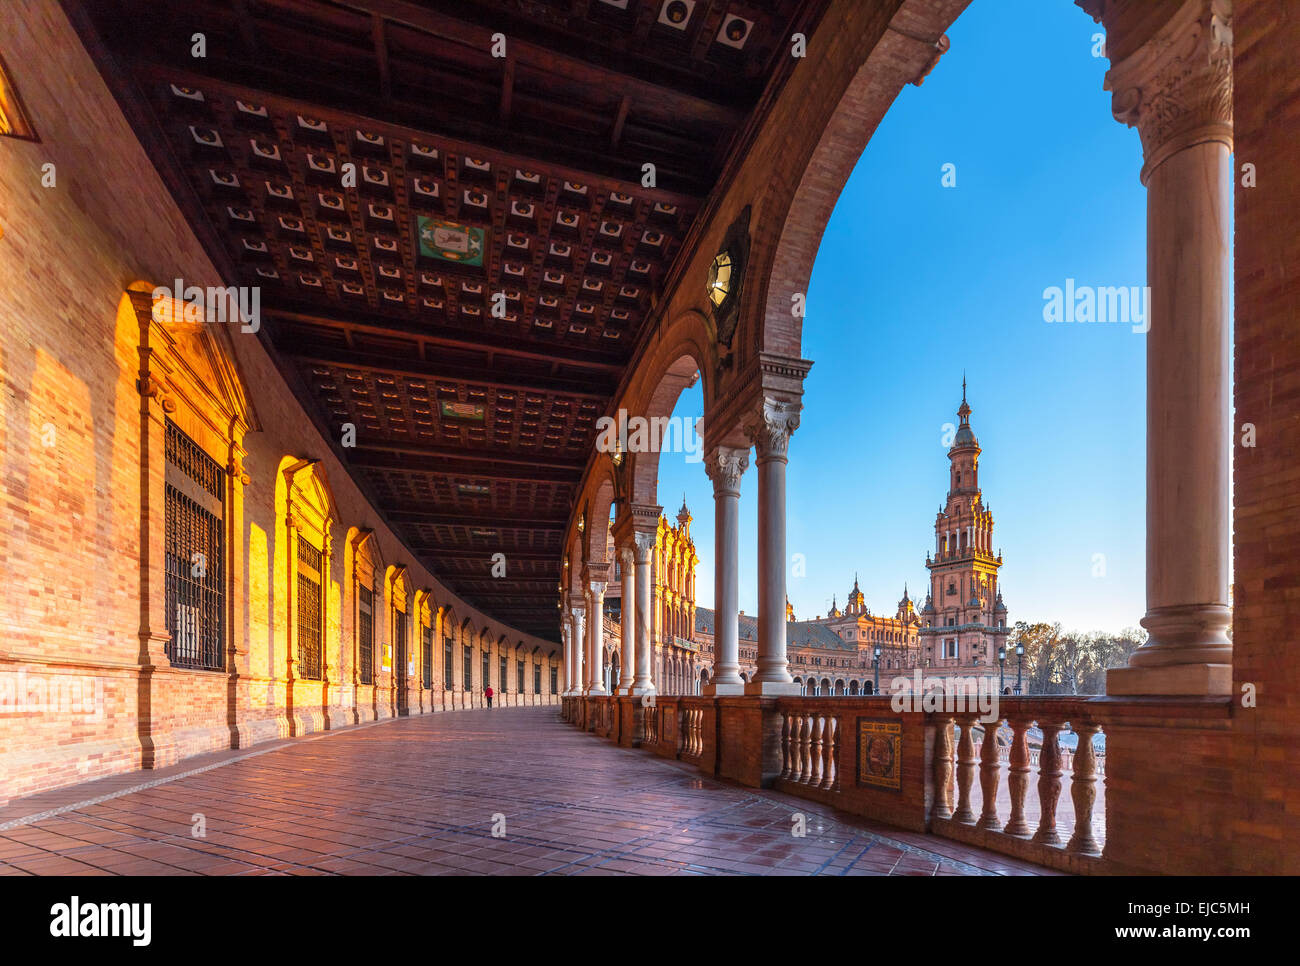 Plaza de Espana Seville Spain Sevilla, at sunset. View towards the South tower of the main building. Stock Photo